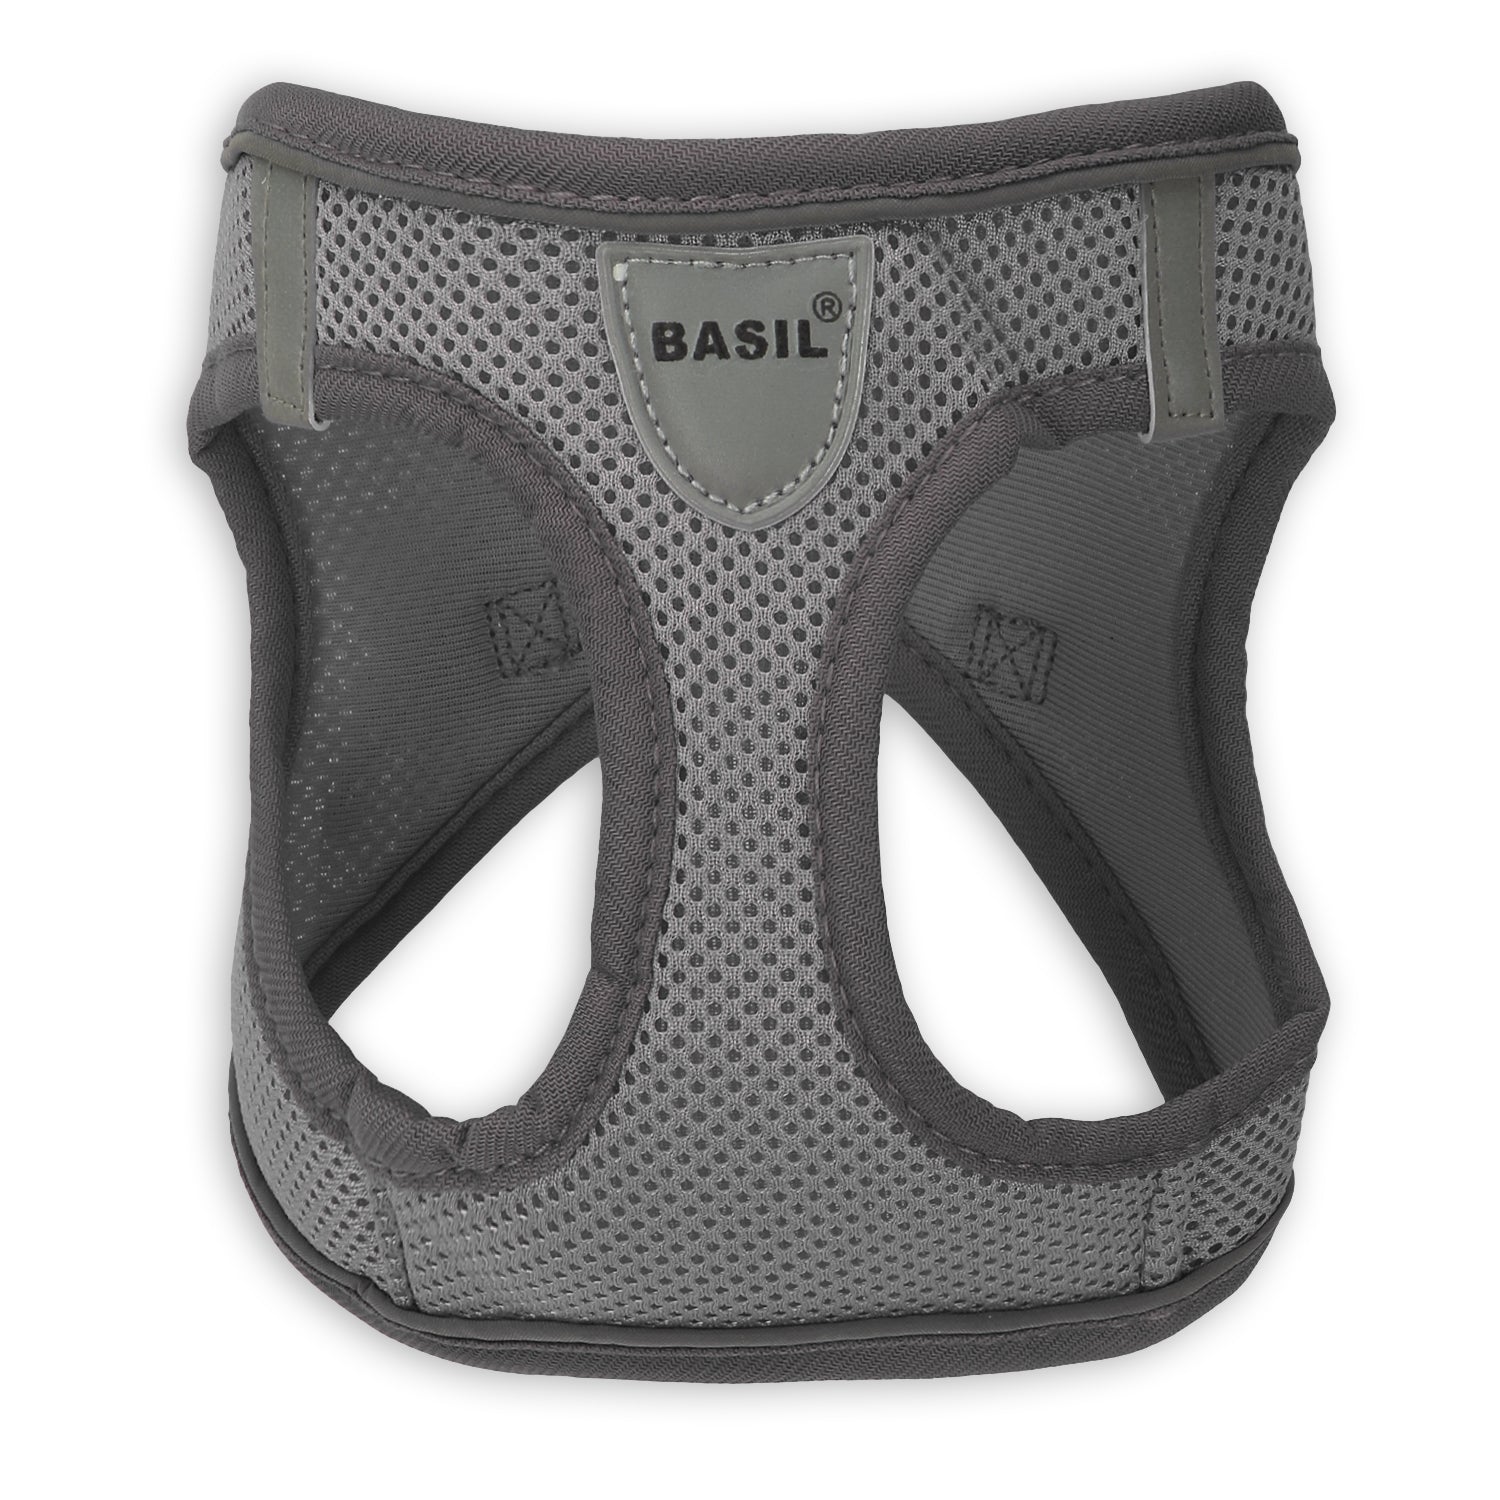 Basil - Adjustable Mesh Harness for Puppy, Dogs & Cats Grey